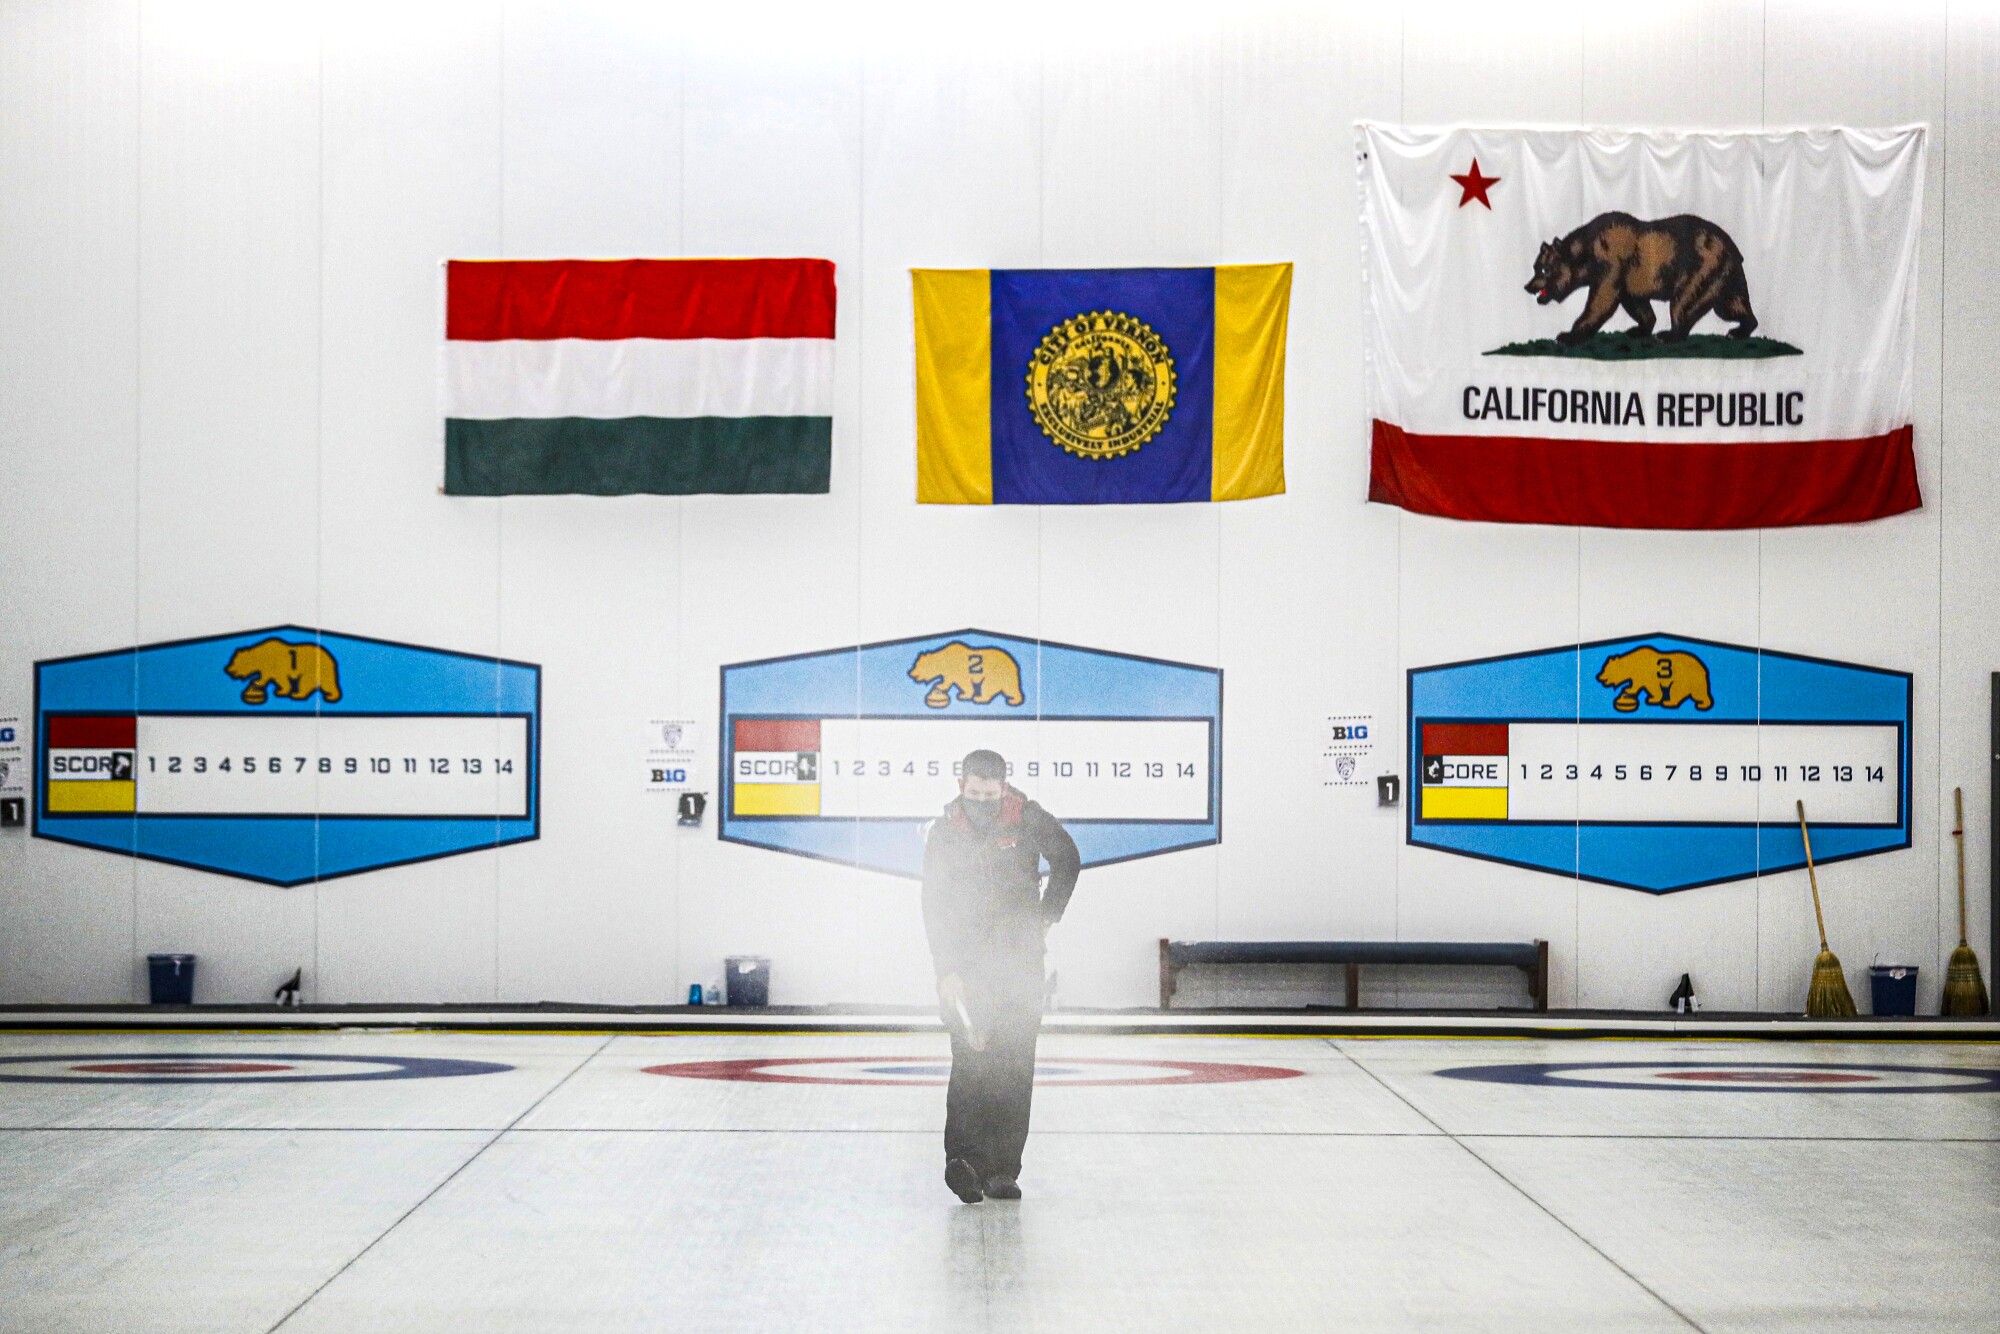 Hot water is sprayed to "pebble" Southern California Curling Center's dedicated ice.